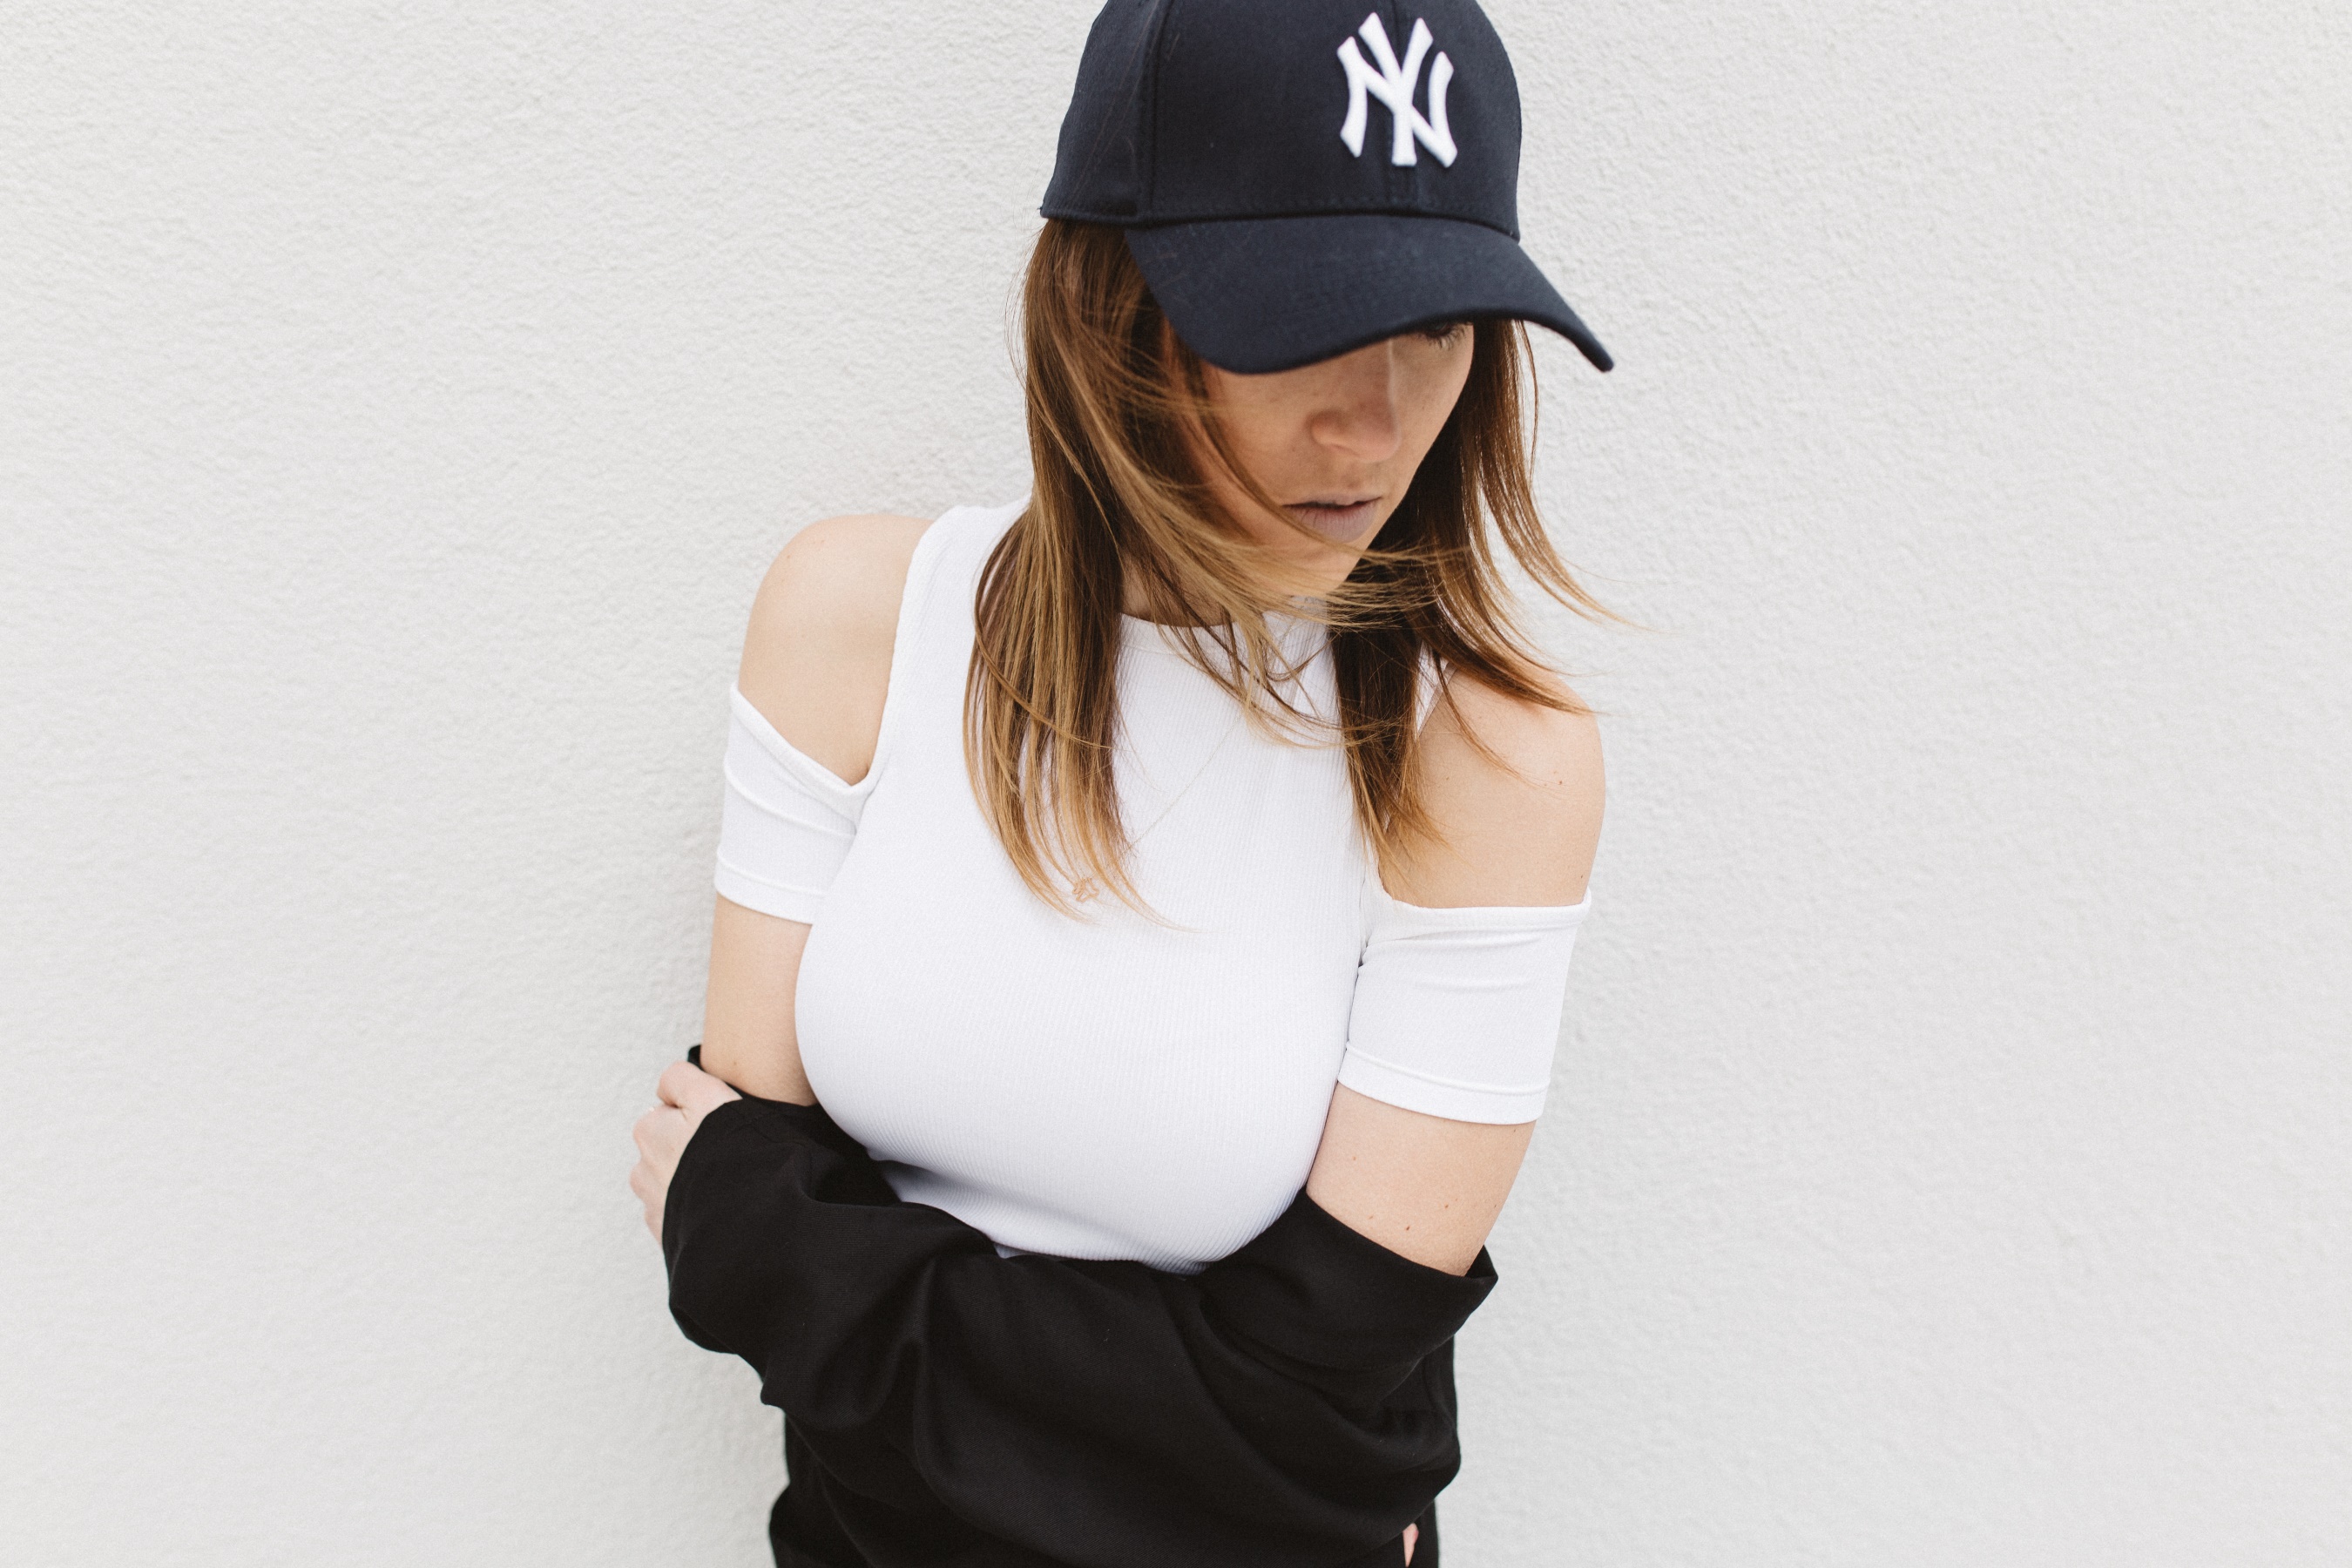 NY Cap x Black and White Basic Outfit - fruity.sky